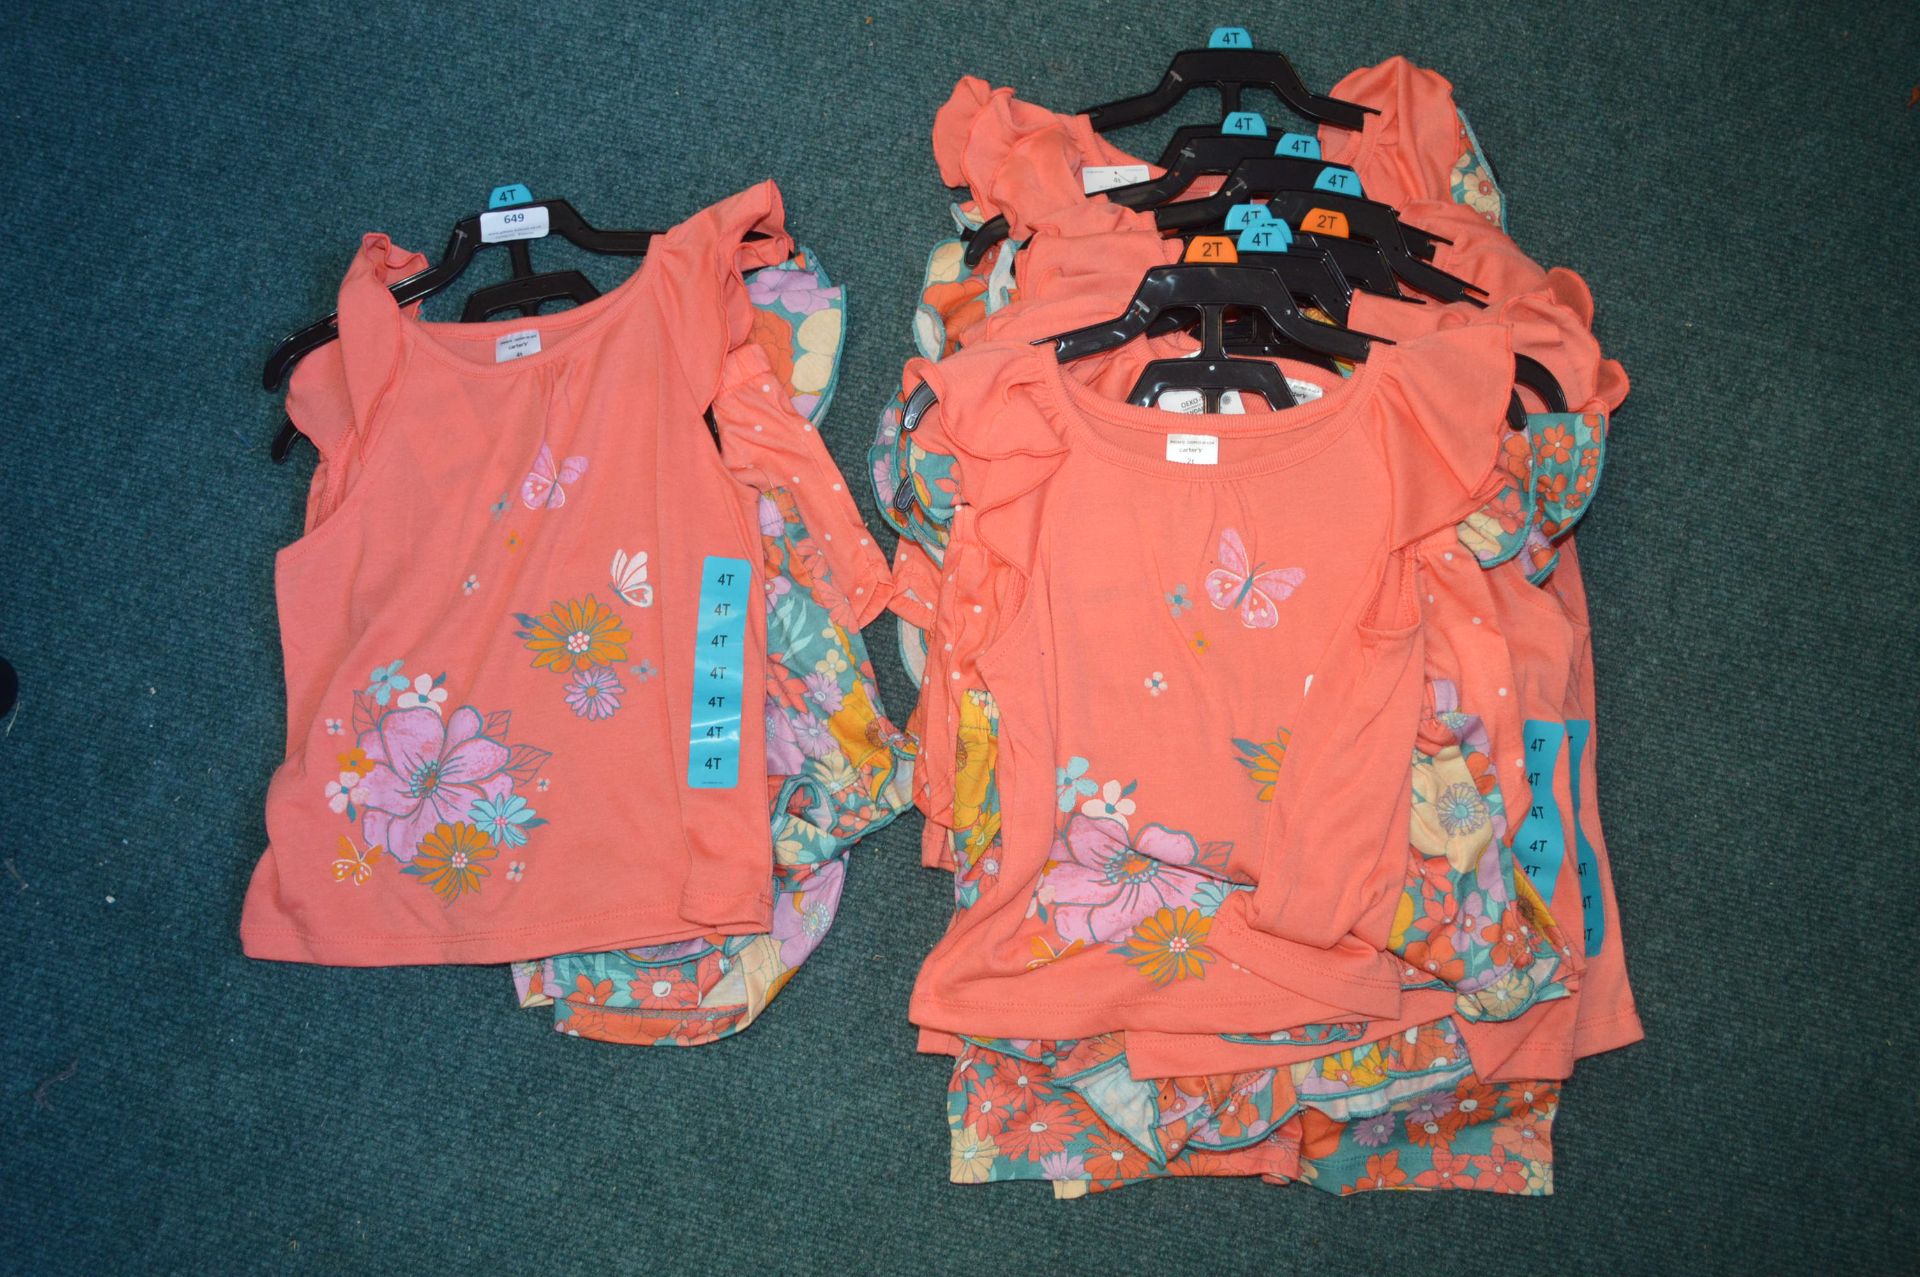 Ten Assorted Girl’s T-Shirts and Short Sets